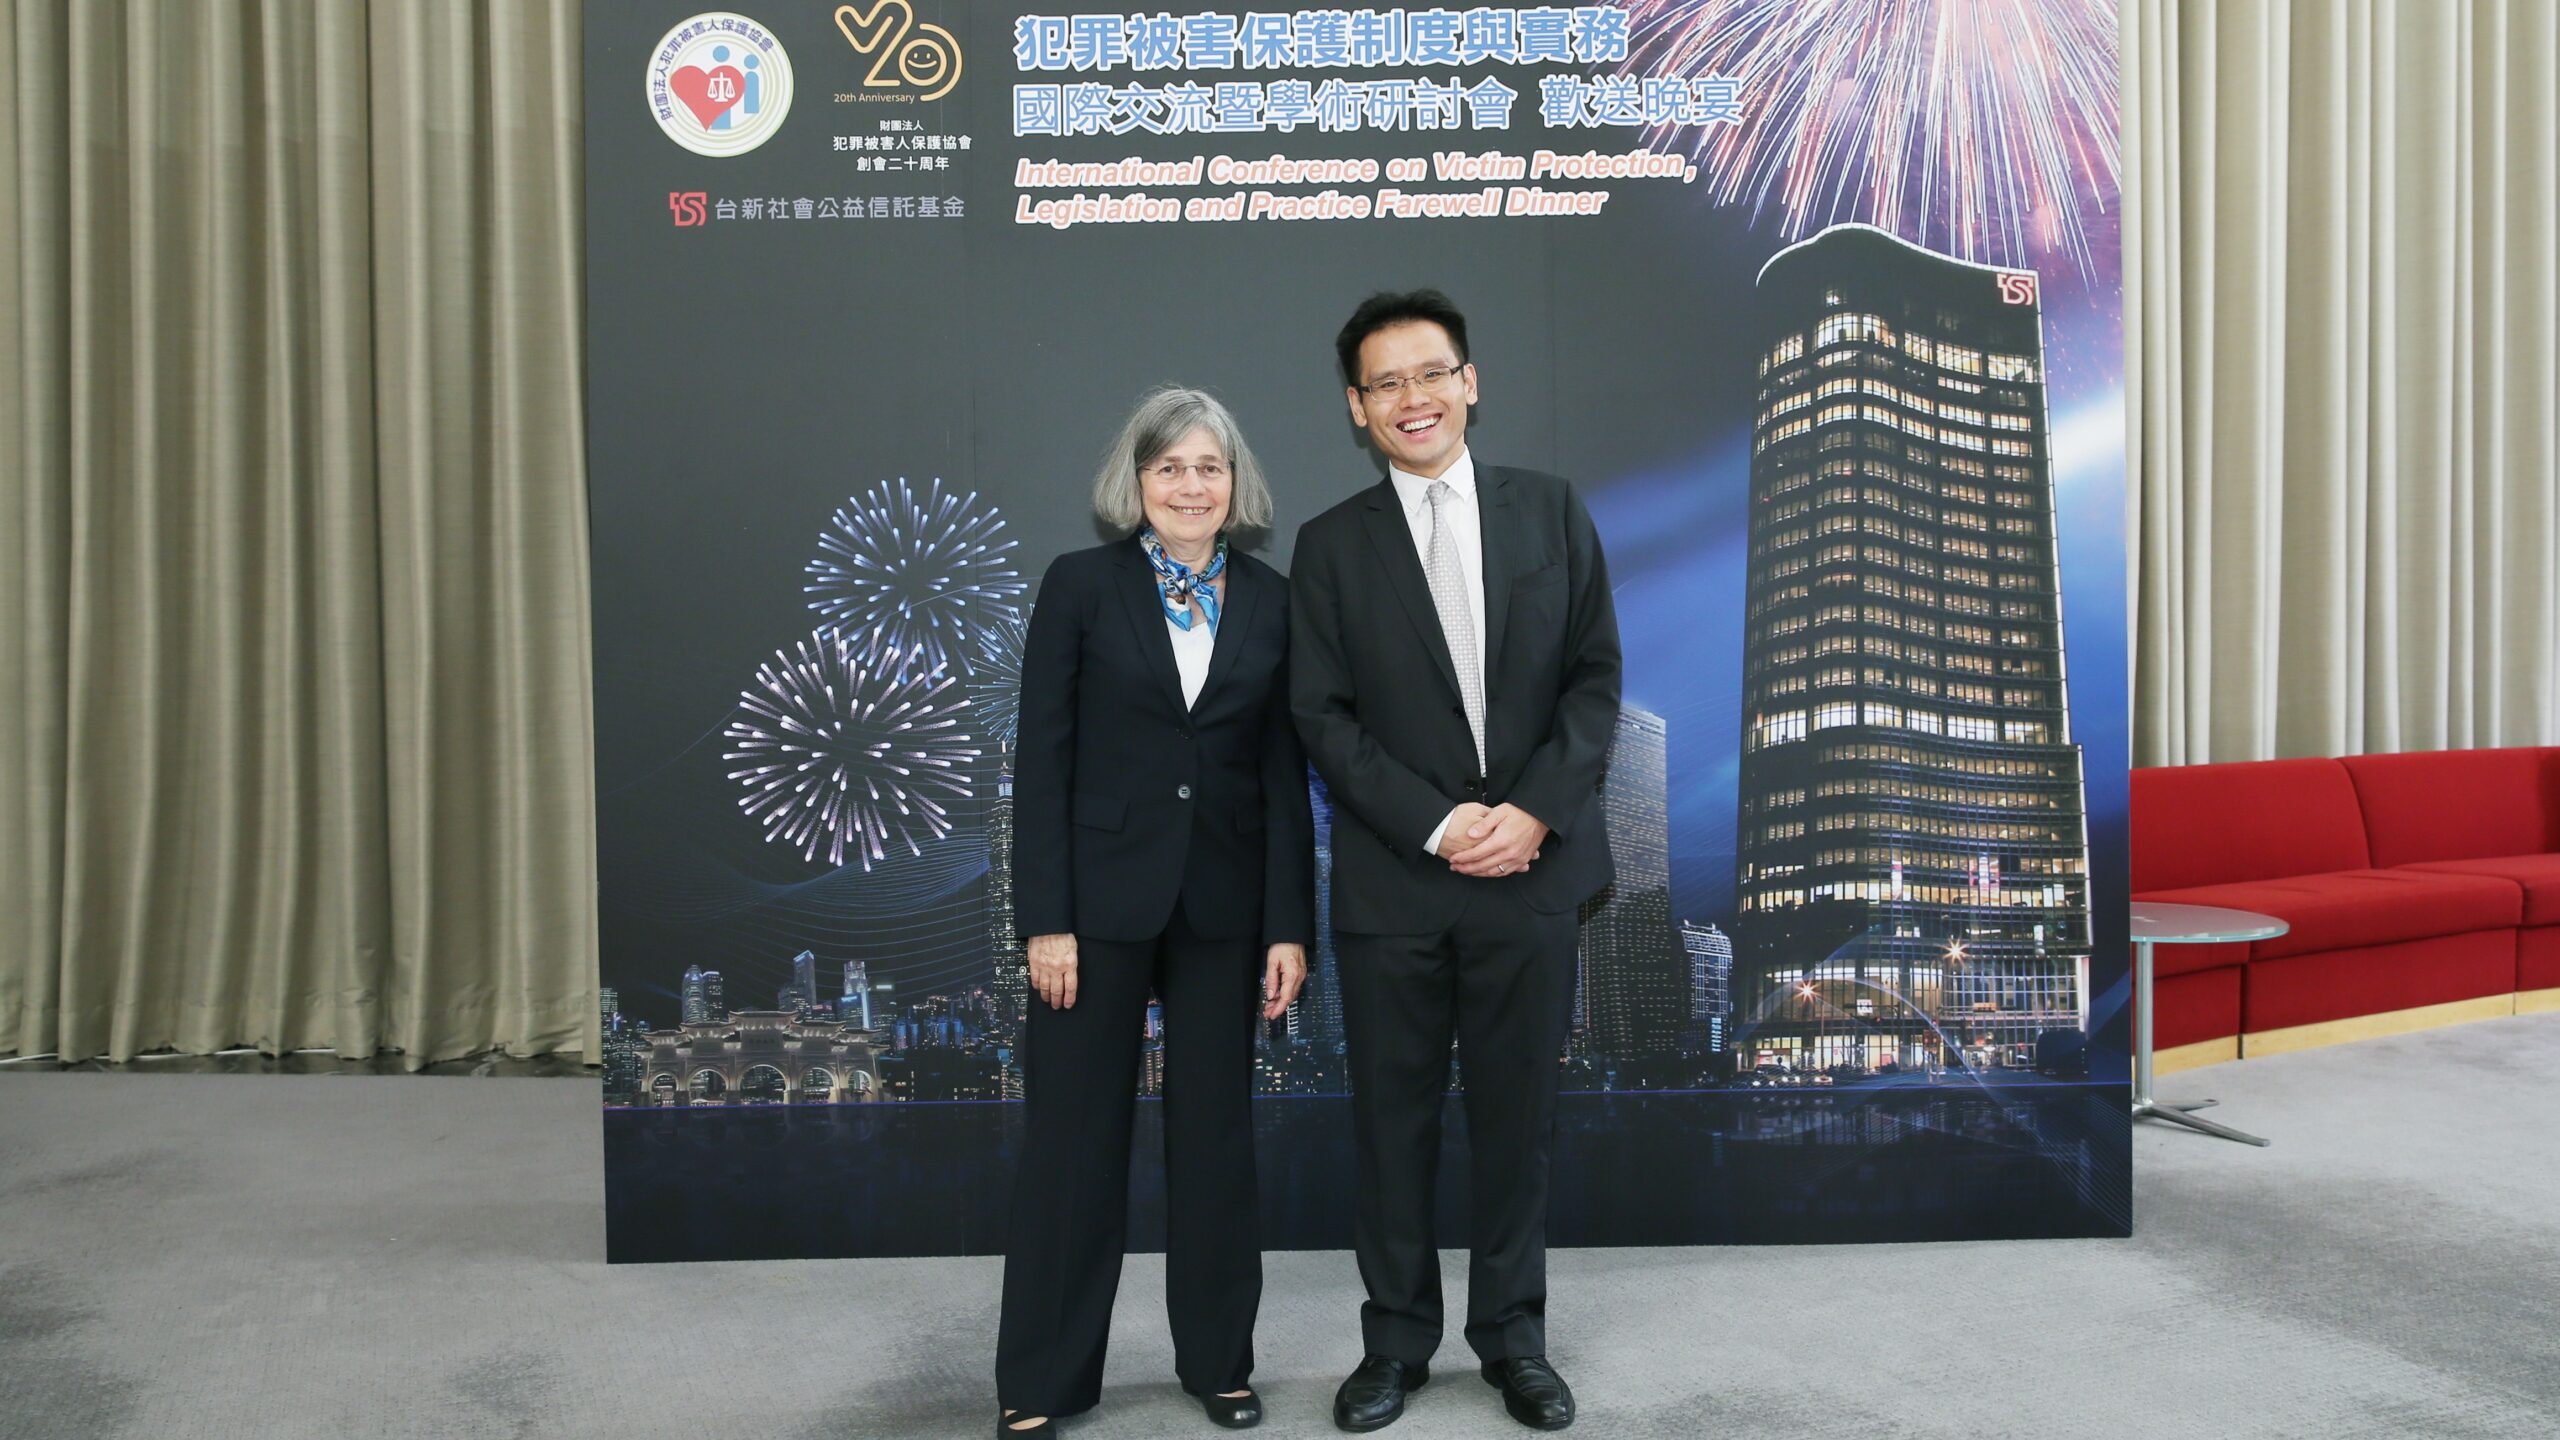 Dr. Joan Pennell at a Conference in Taiwan